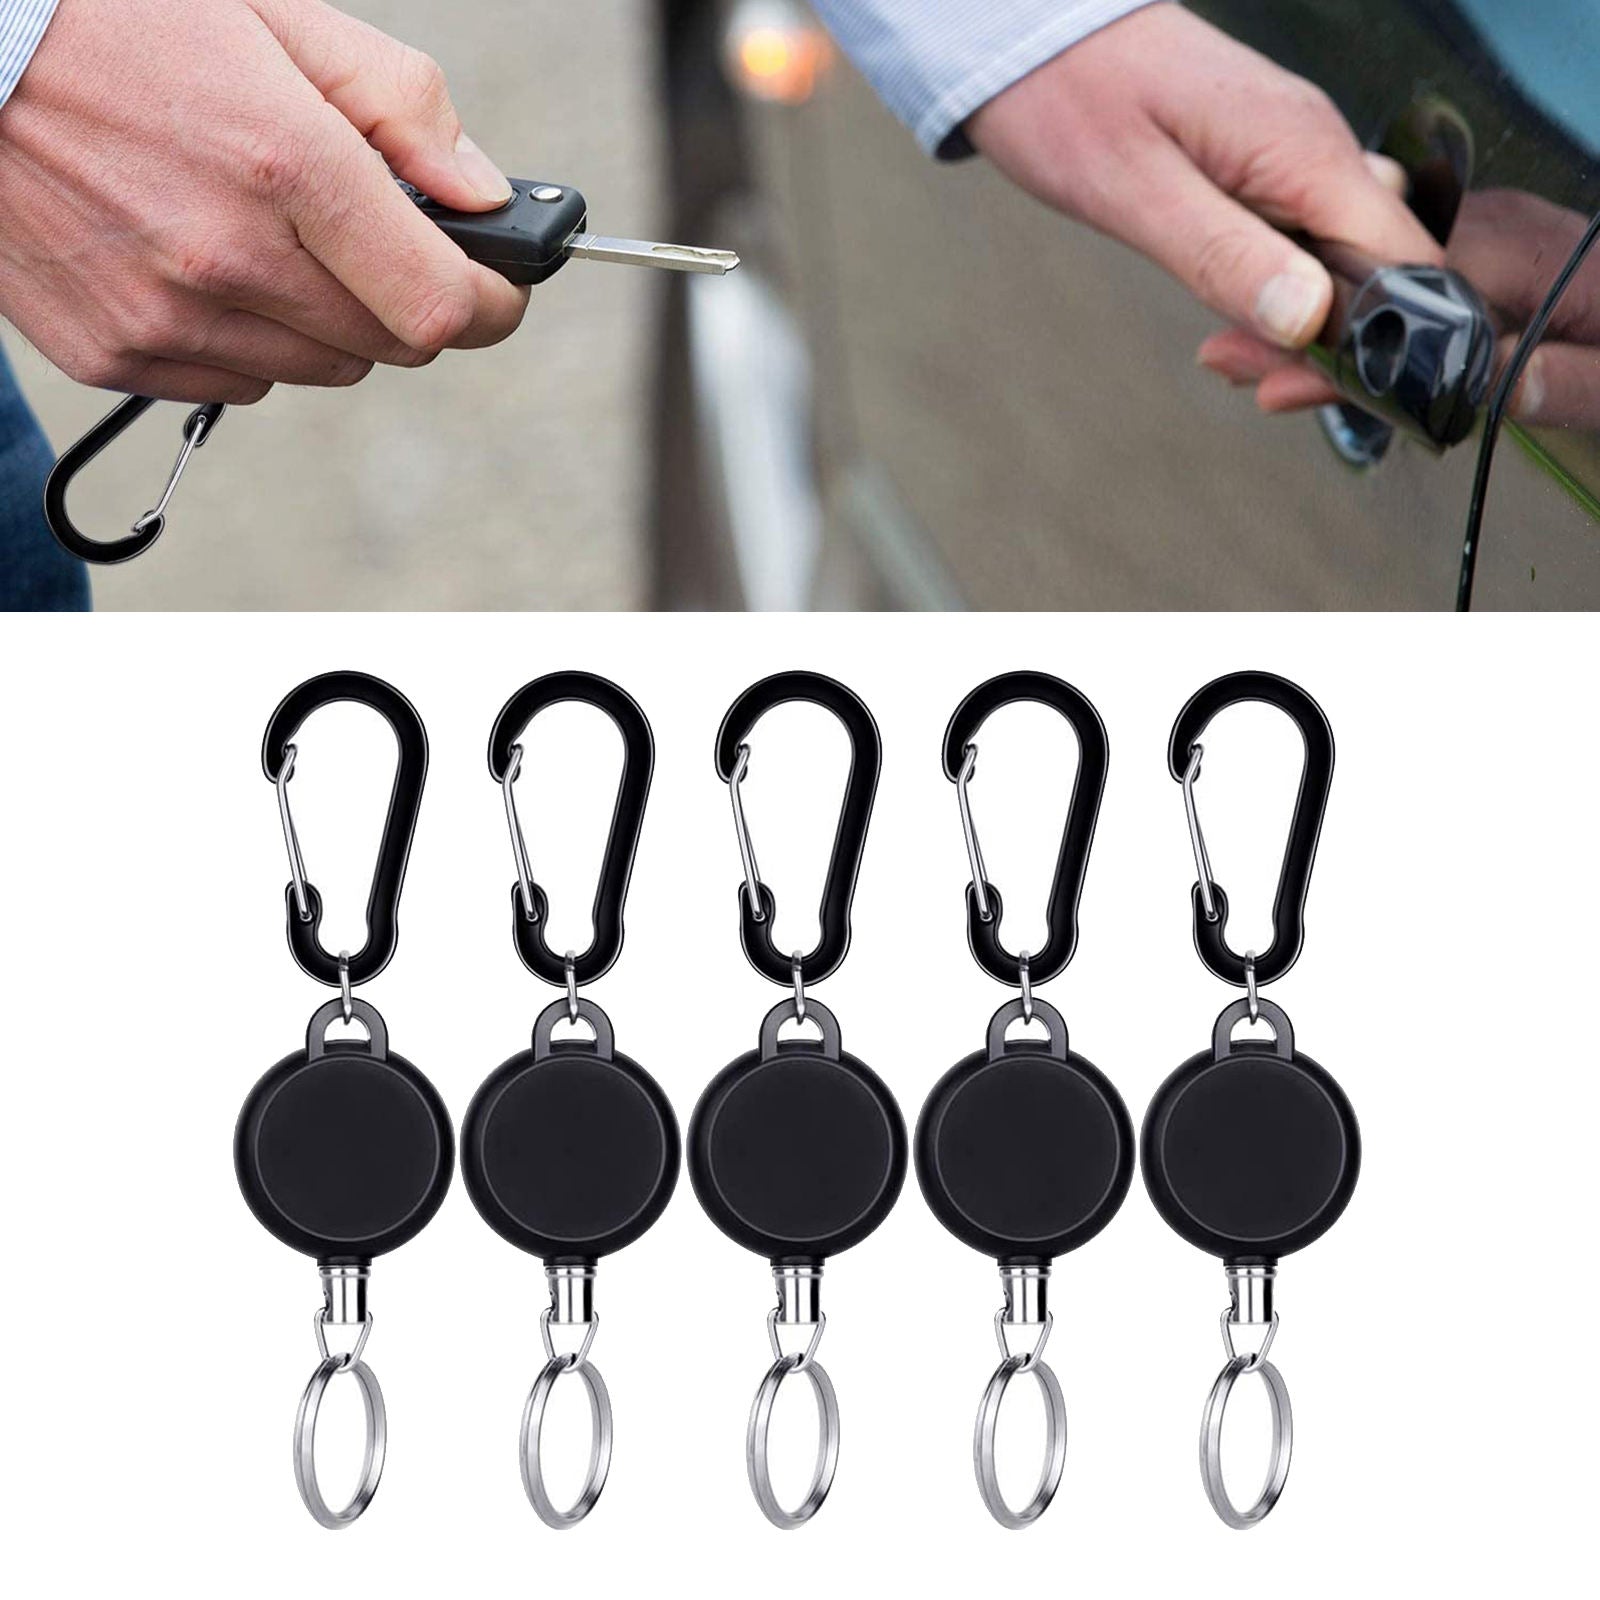 Pack of 5 Retractable Key Chain, Stretchable Key Holder with 60cm/ 23.6 Inches